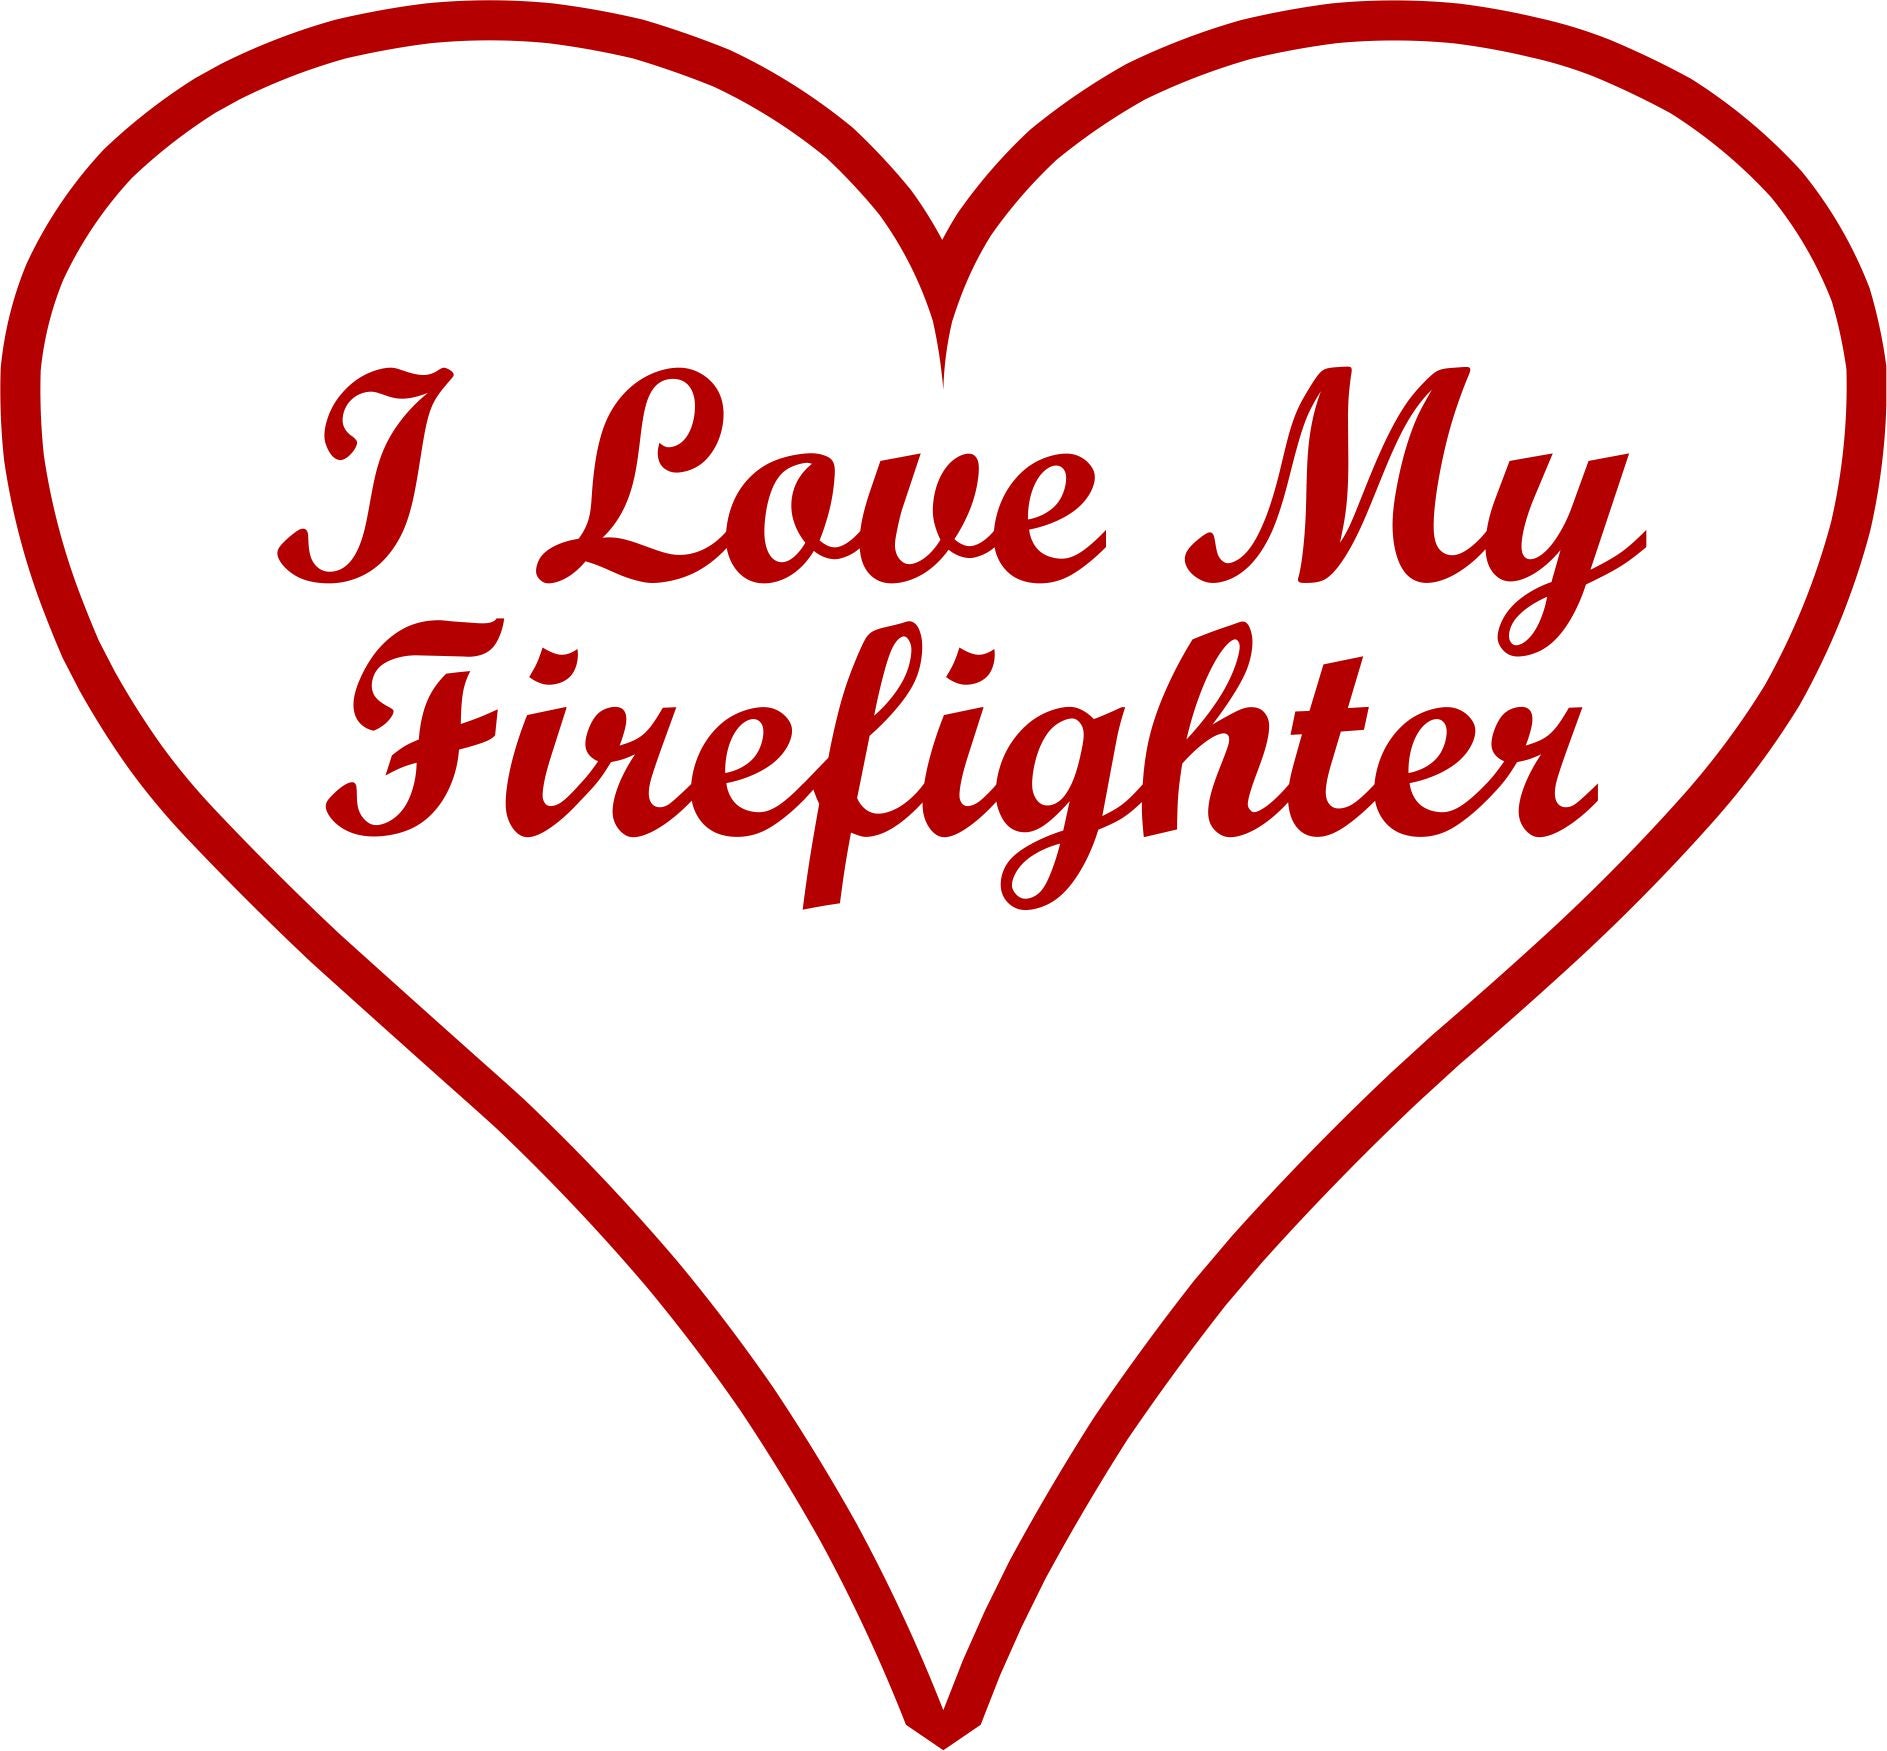 I Love My Firefighters Heart Decal - Powercall Sirens LLC